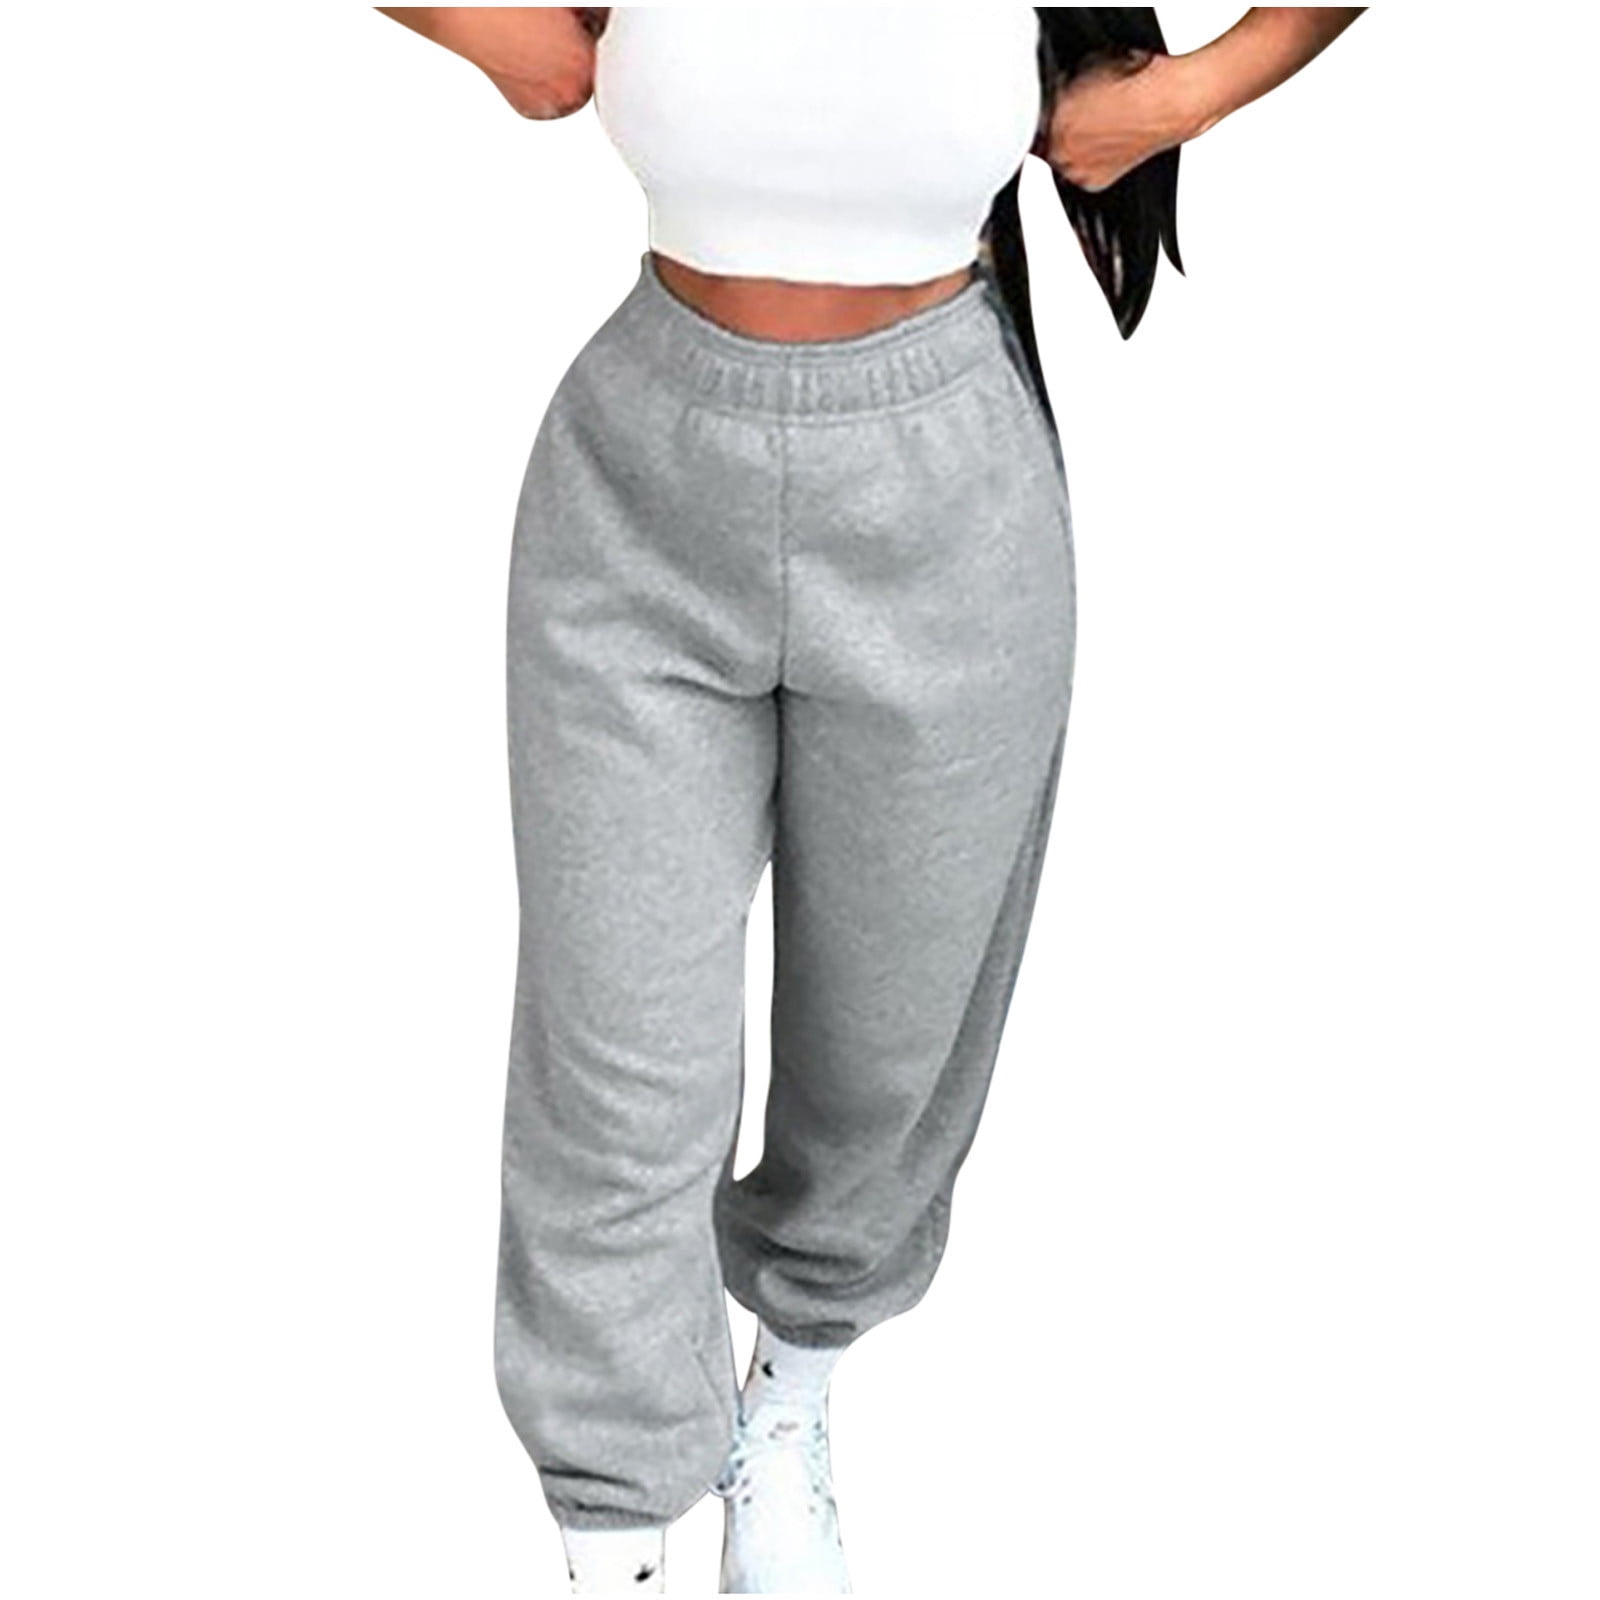 SBYOJLPB Women's Plus Size Pants Thicken Fashion Casual Pocket High Waist  Sweatpants for Women Pants Trousers Reduced Price Gray 10(XL) 